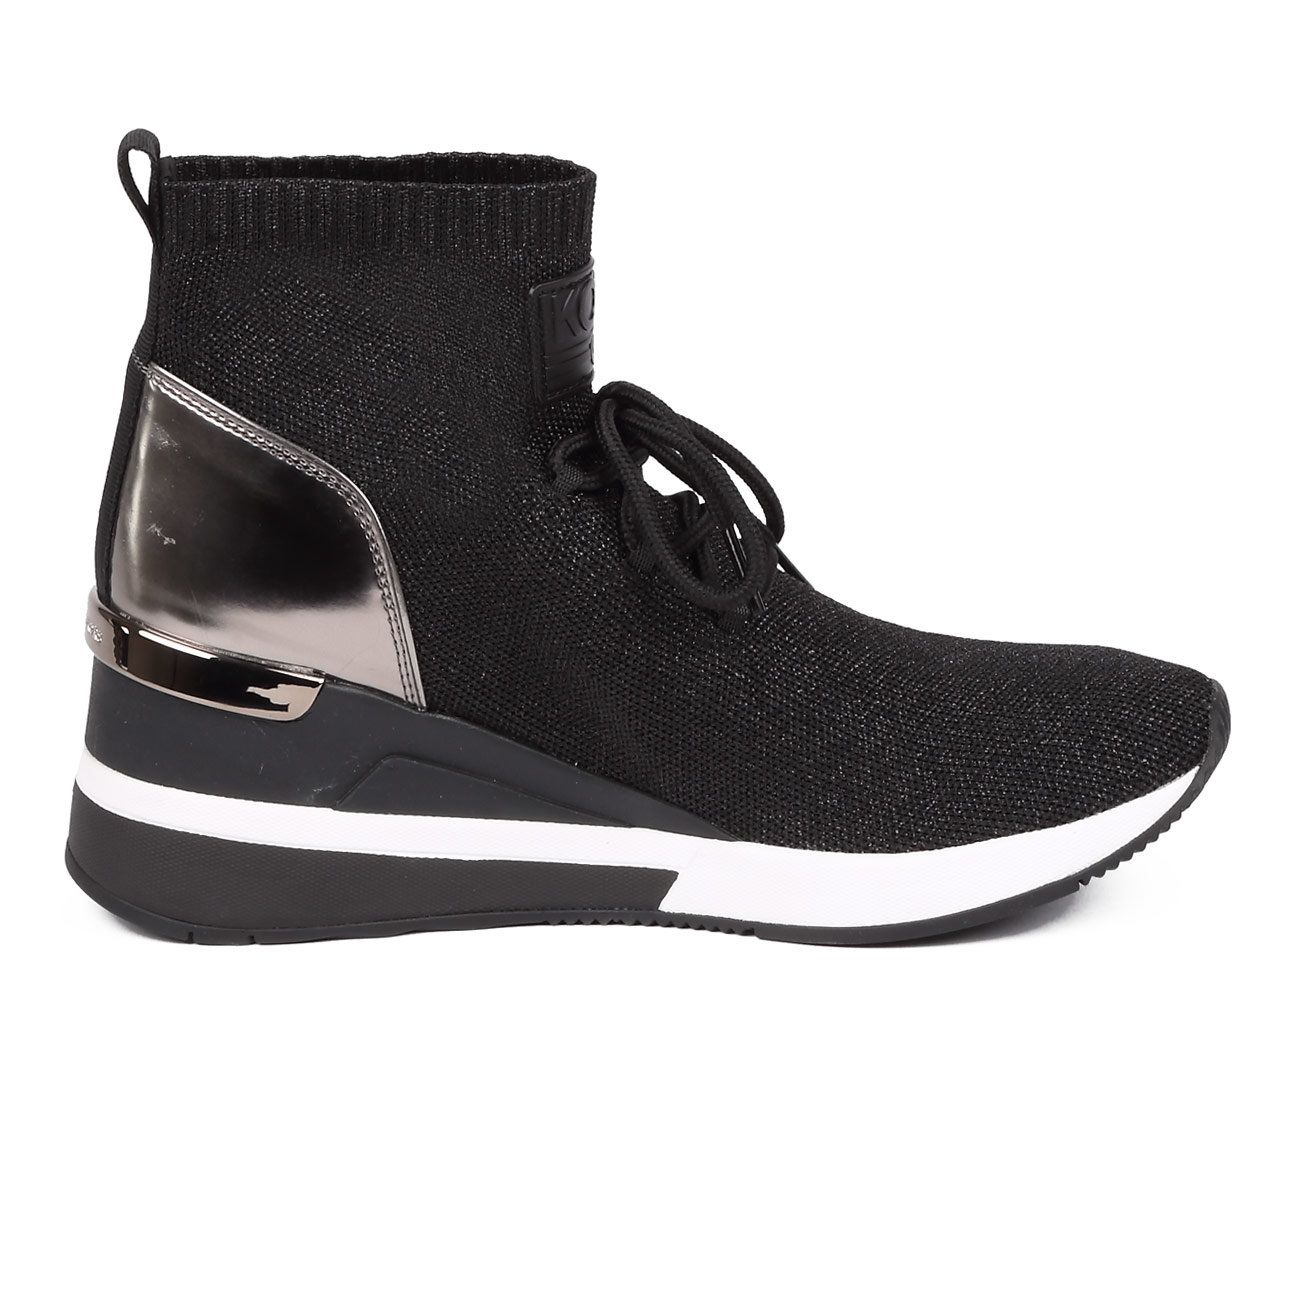 MICHAEL KORS SOCKS SNEAKERS WITH LACES AND SILVER SUPPORT ON THE HEEL Woman  Black Gun | Mascheroni Moda